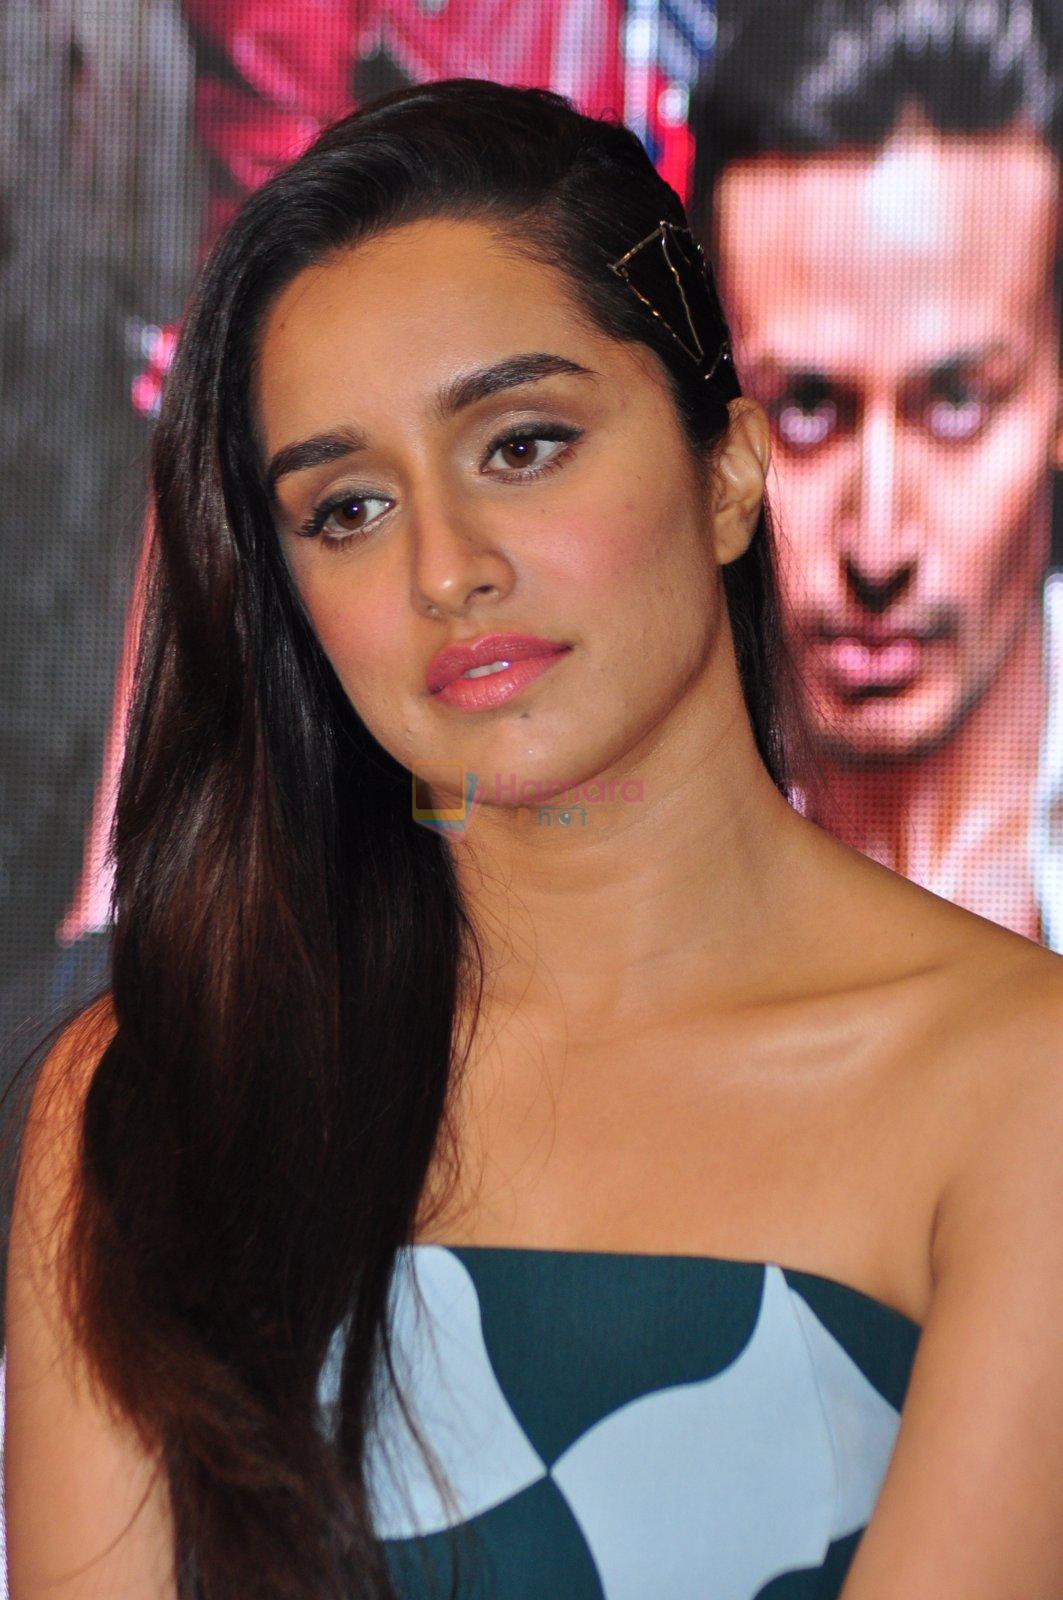 Shraddha Kapoor at Baaghi promotions in Mumbai on 22nd April 2016